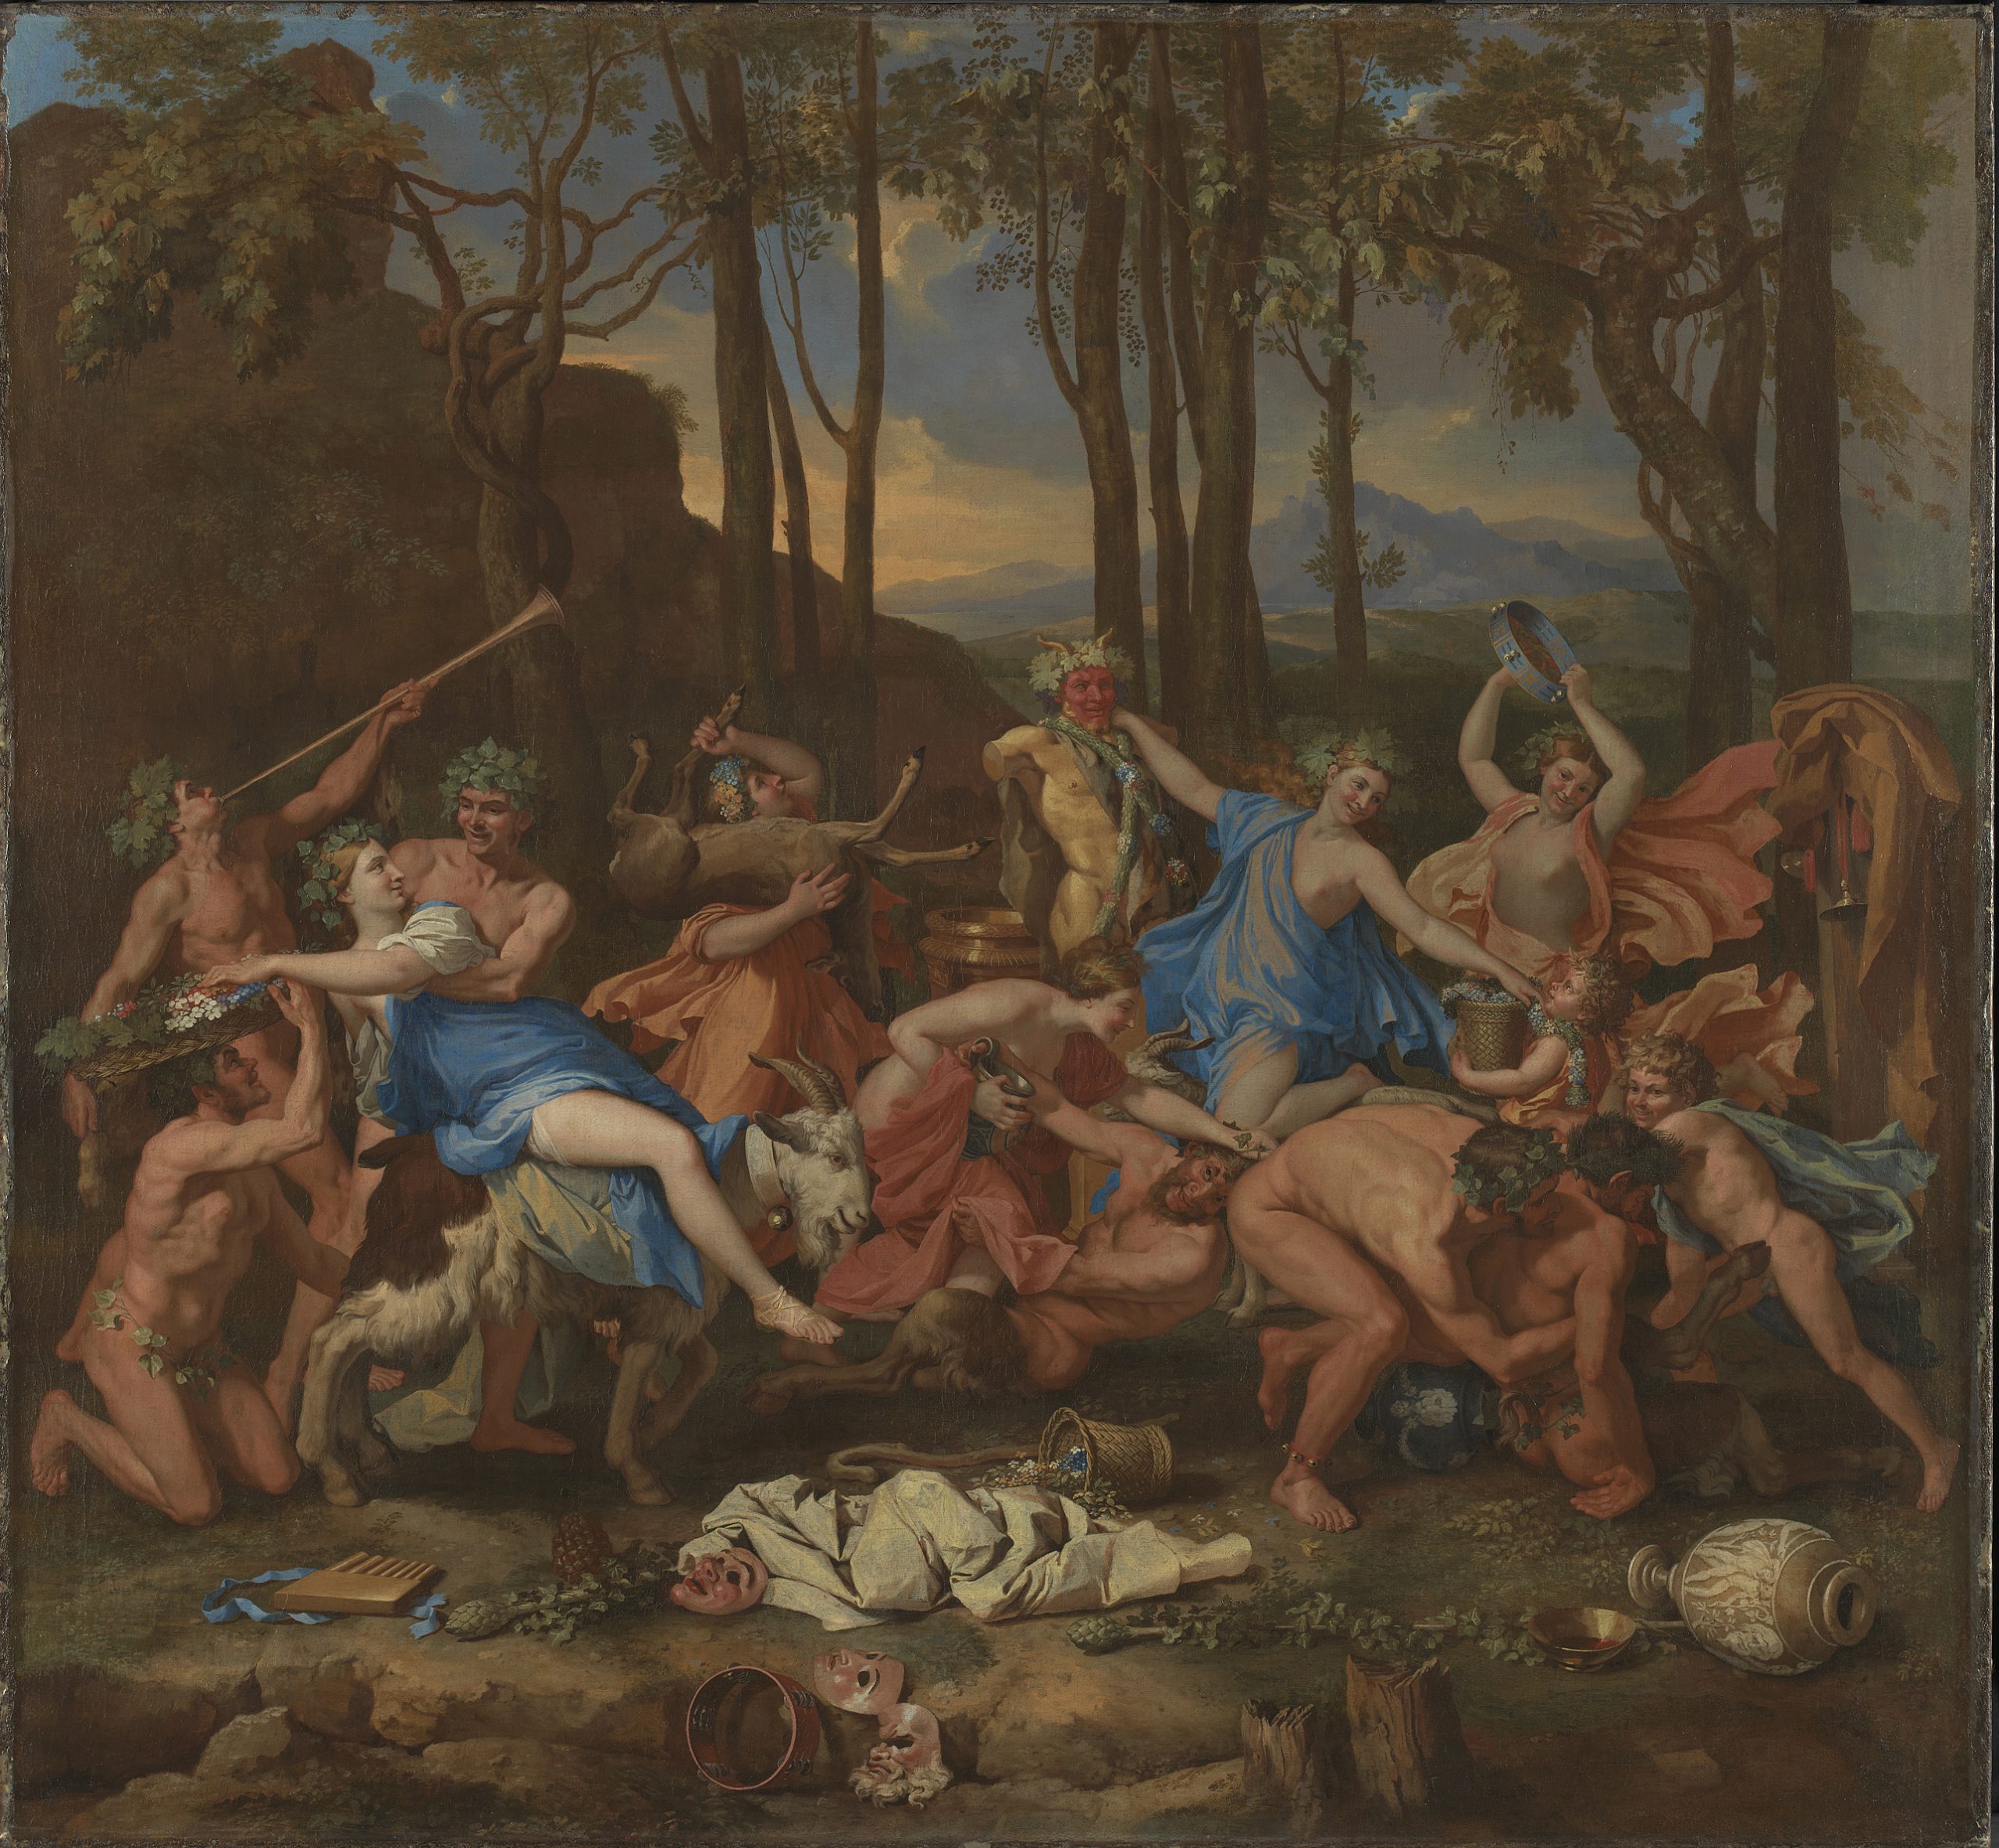 Nicolas Poussin, The Triumph of Pan, 1636, Oil on canvas, 135.9 x 146 cm, © The National Gallery, London